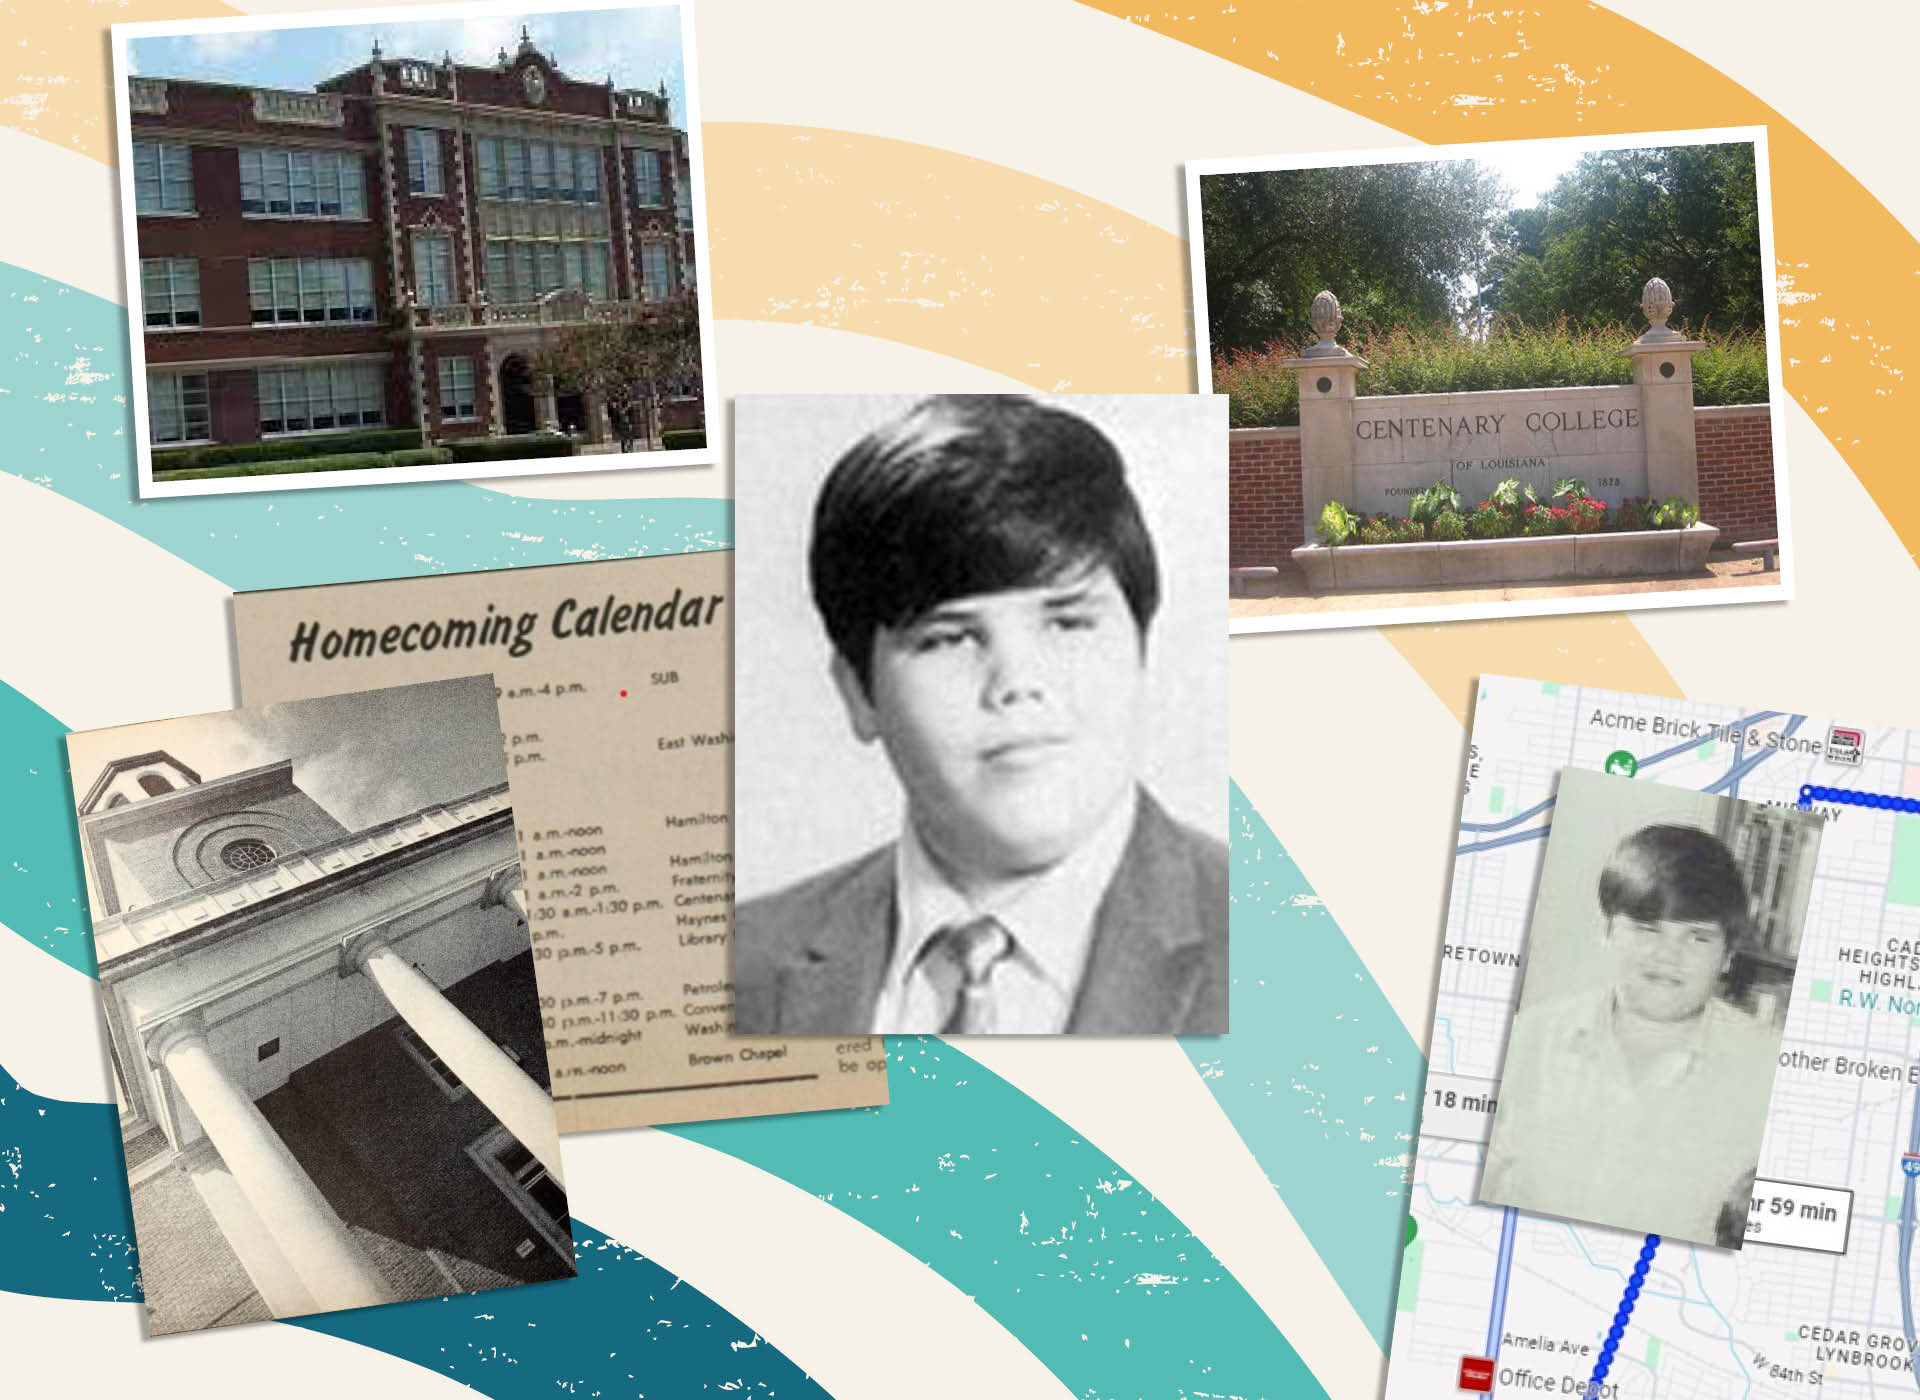 collage of david's yearbook picture, a picture of his school, the map of the possible route he took, centenary college, the college's homecoming schedule